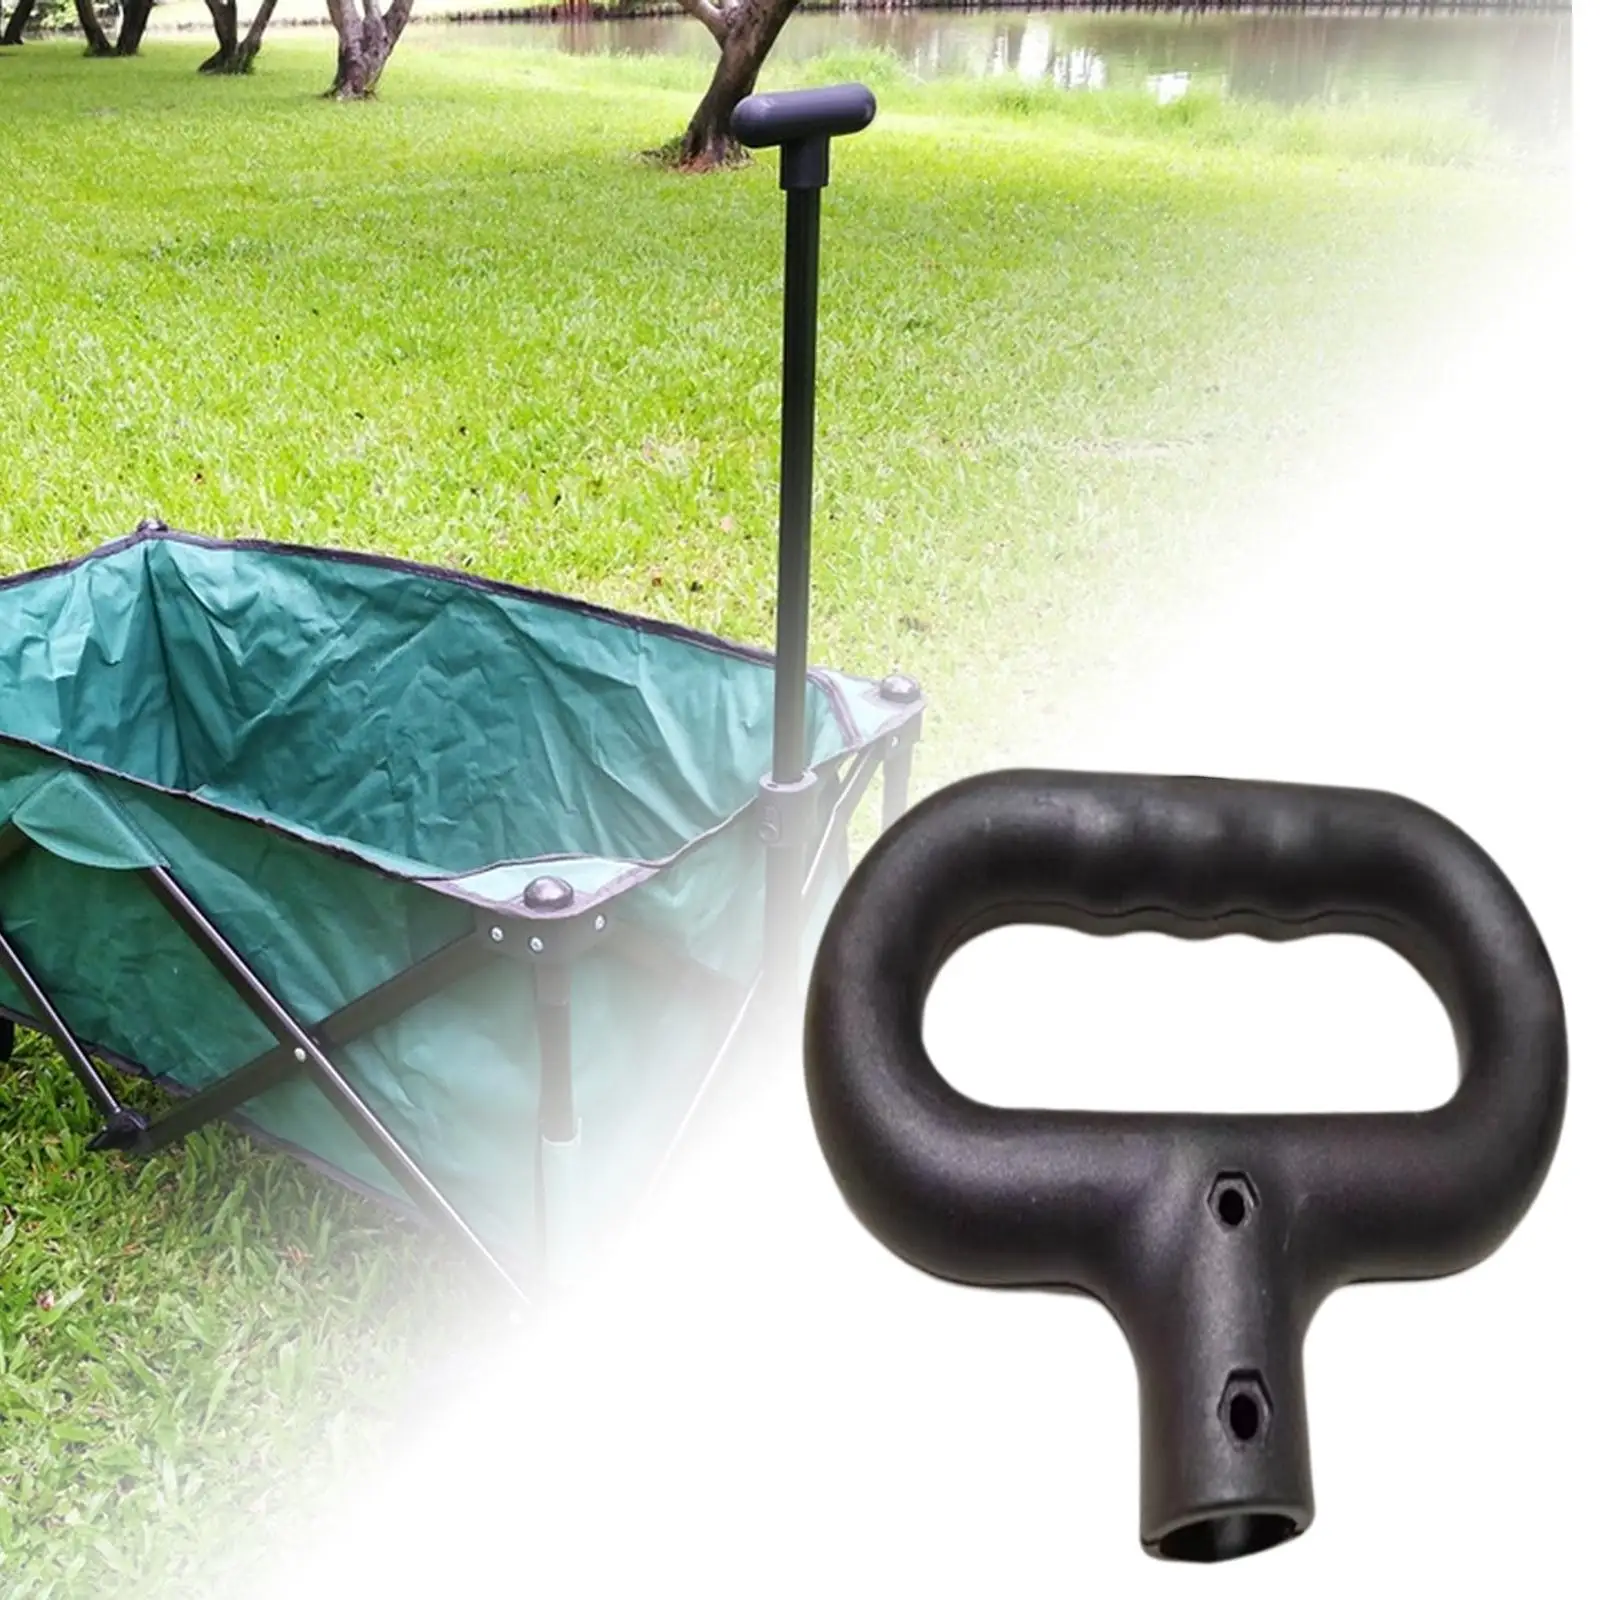 Wagon Cart Push Handle Lightweight Replacements for Collapsible Wagon Cart Outdoor Shopping Cart Camping Wagon Spare Part